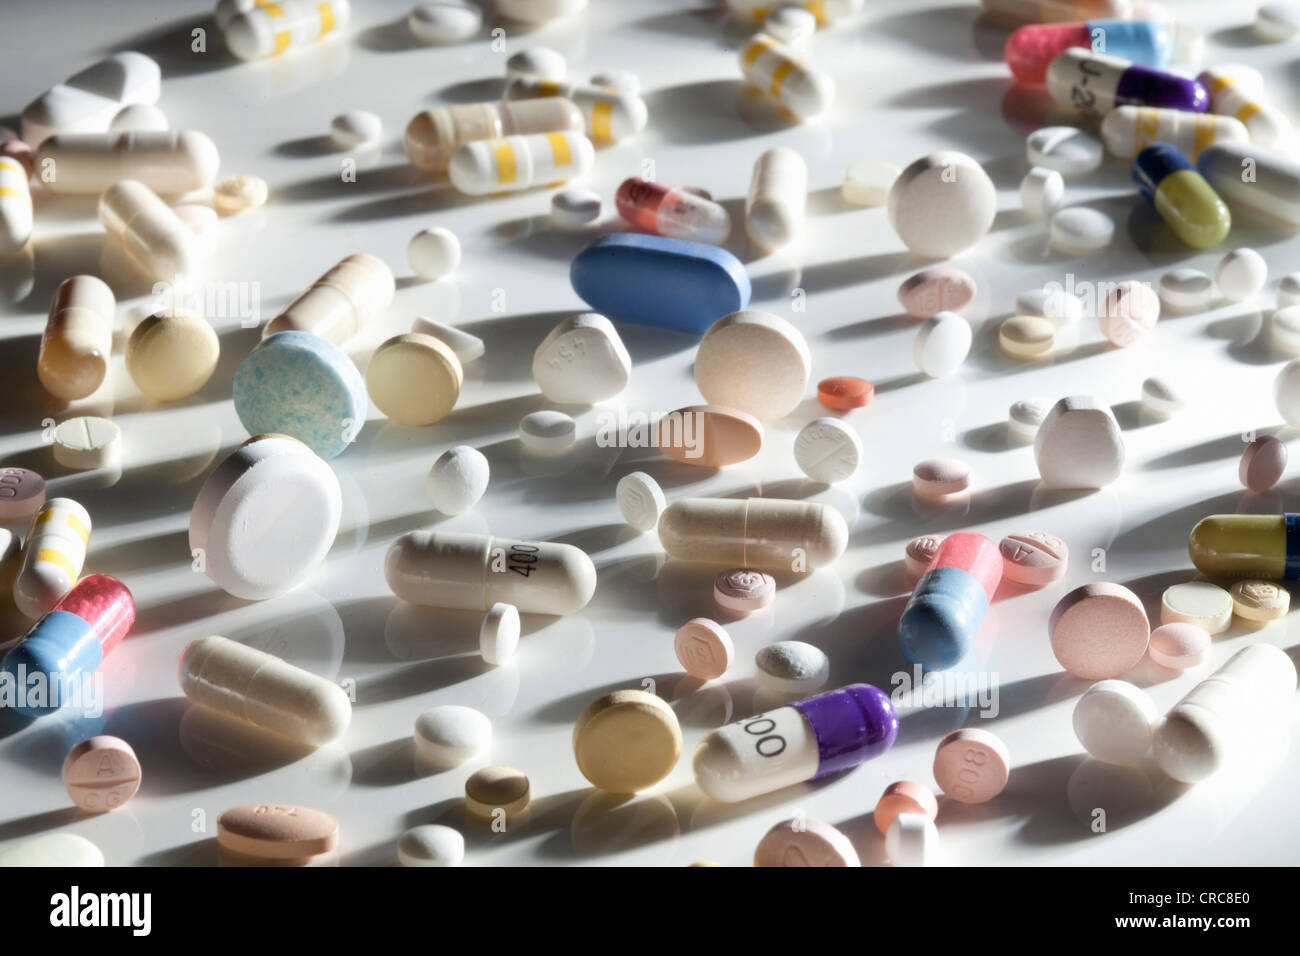 Pills scattered on reflective surface Stock Photo